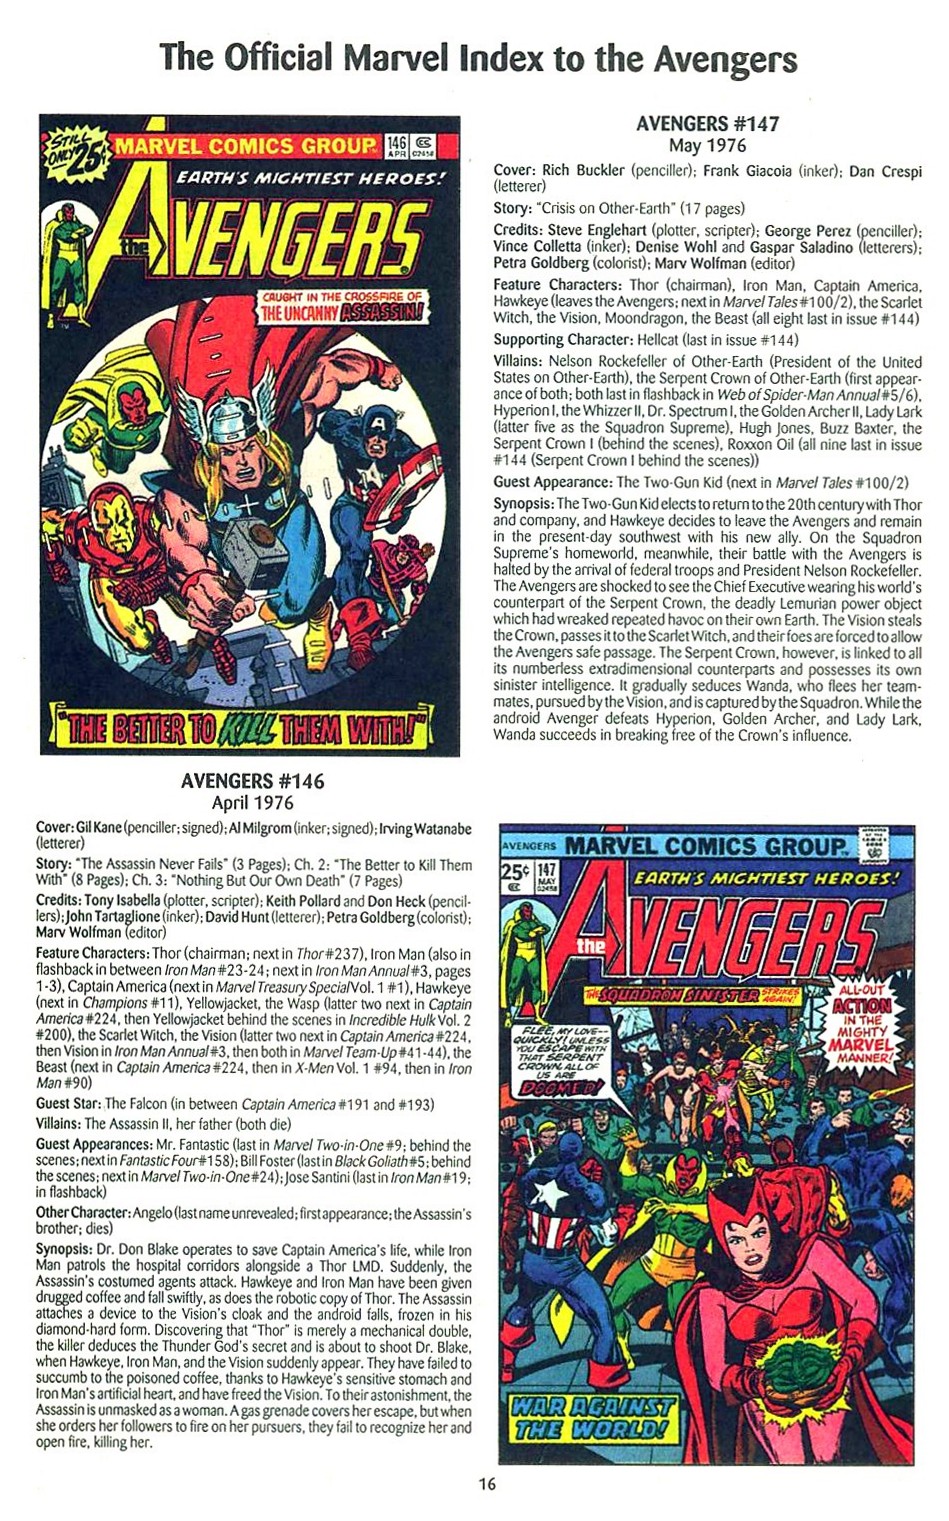 Read online The Official Marvel Index to the Avengers comic -  Issue #3 - 18